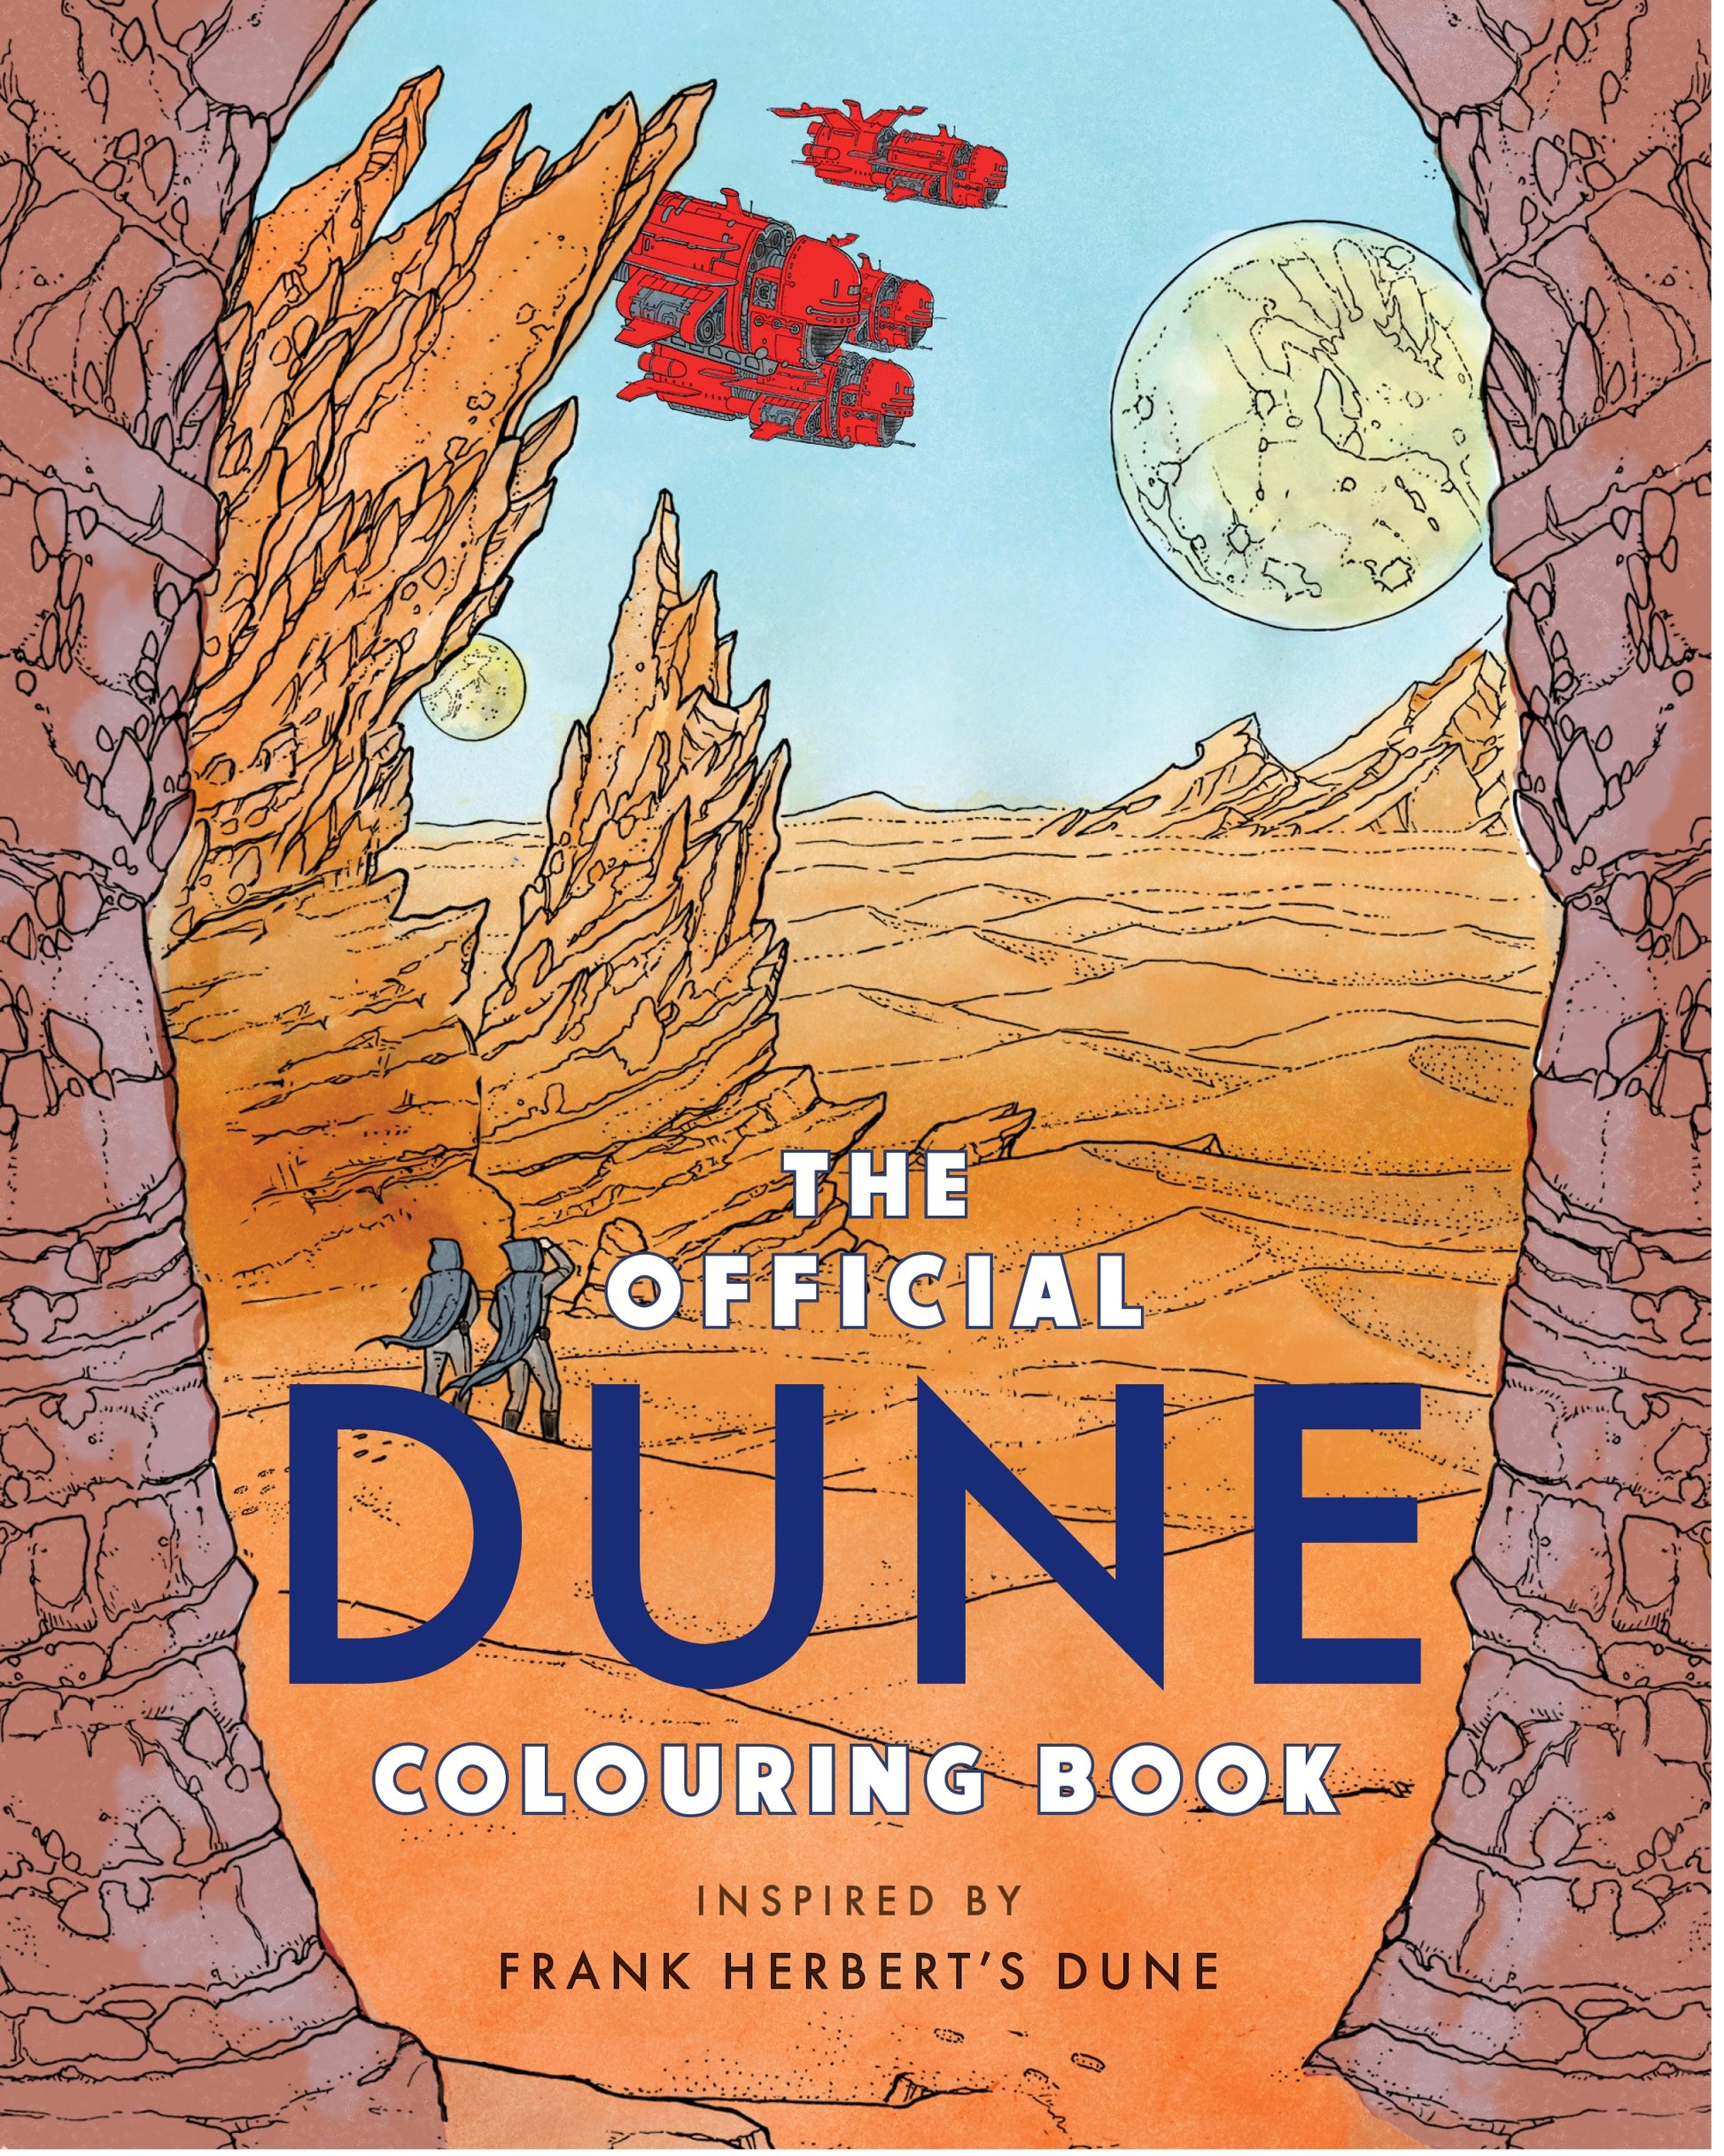 The Official Dune Colouring Book by Frank Herbert